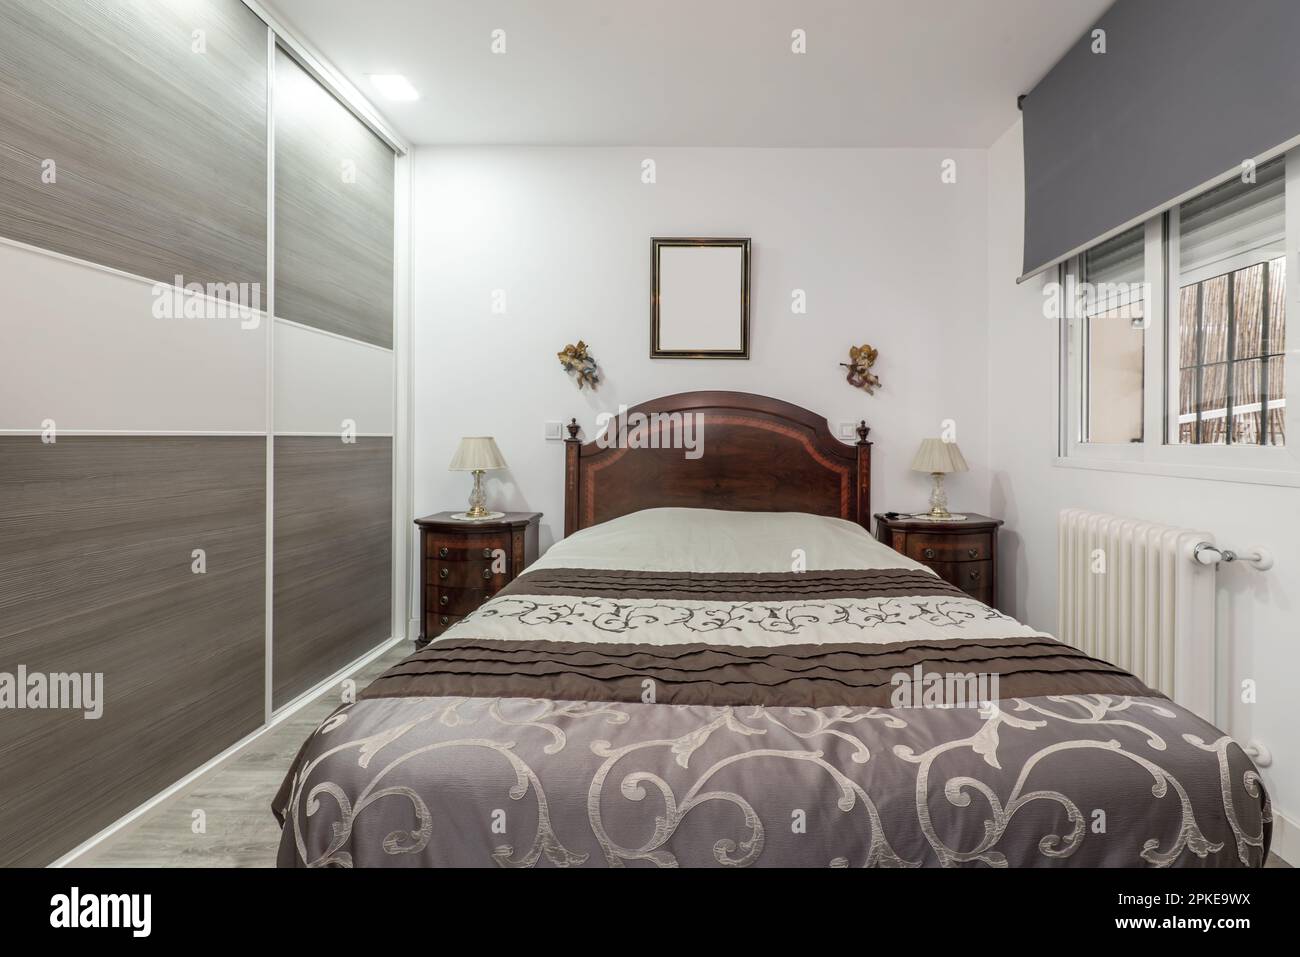 Double bedroom with conventional classic decoration, built-in gray wardrobe with sliding doors and bedside tables made of varnished root wood Stock Photo